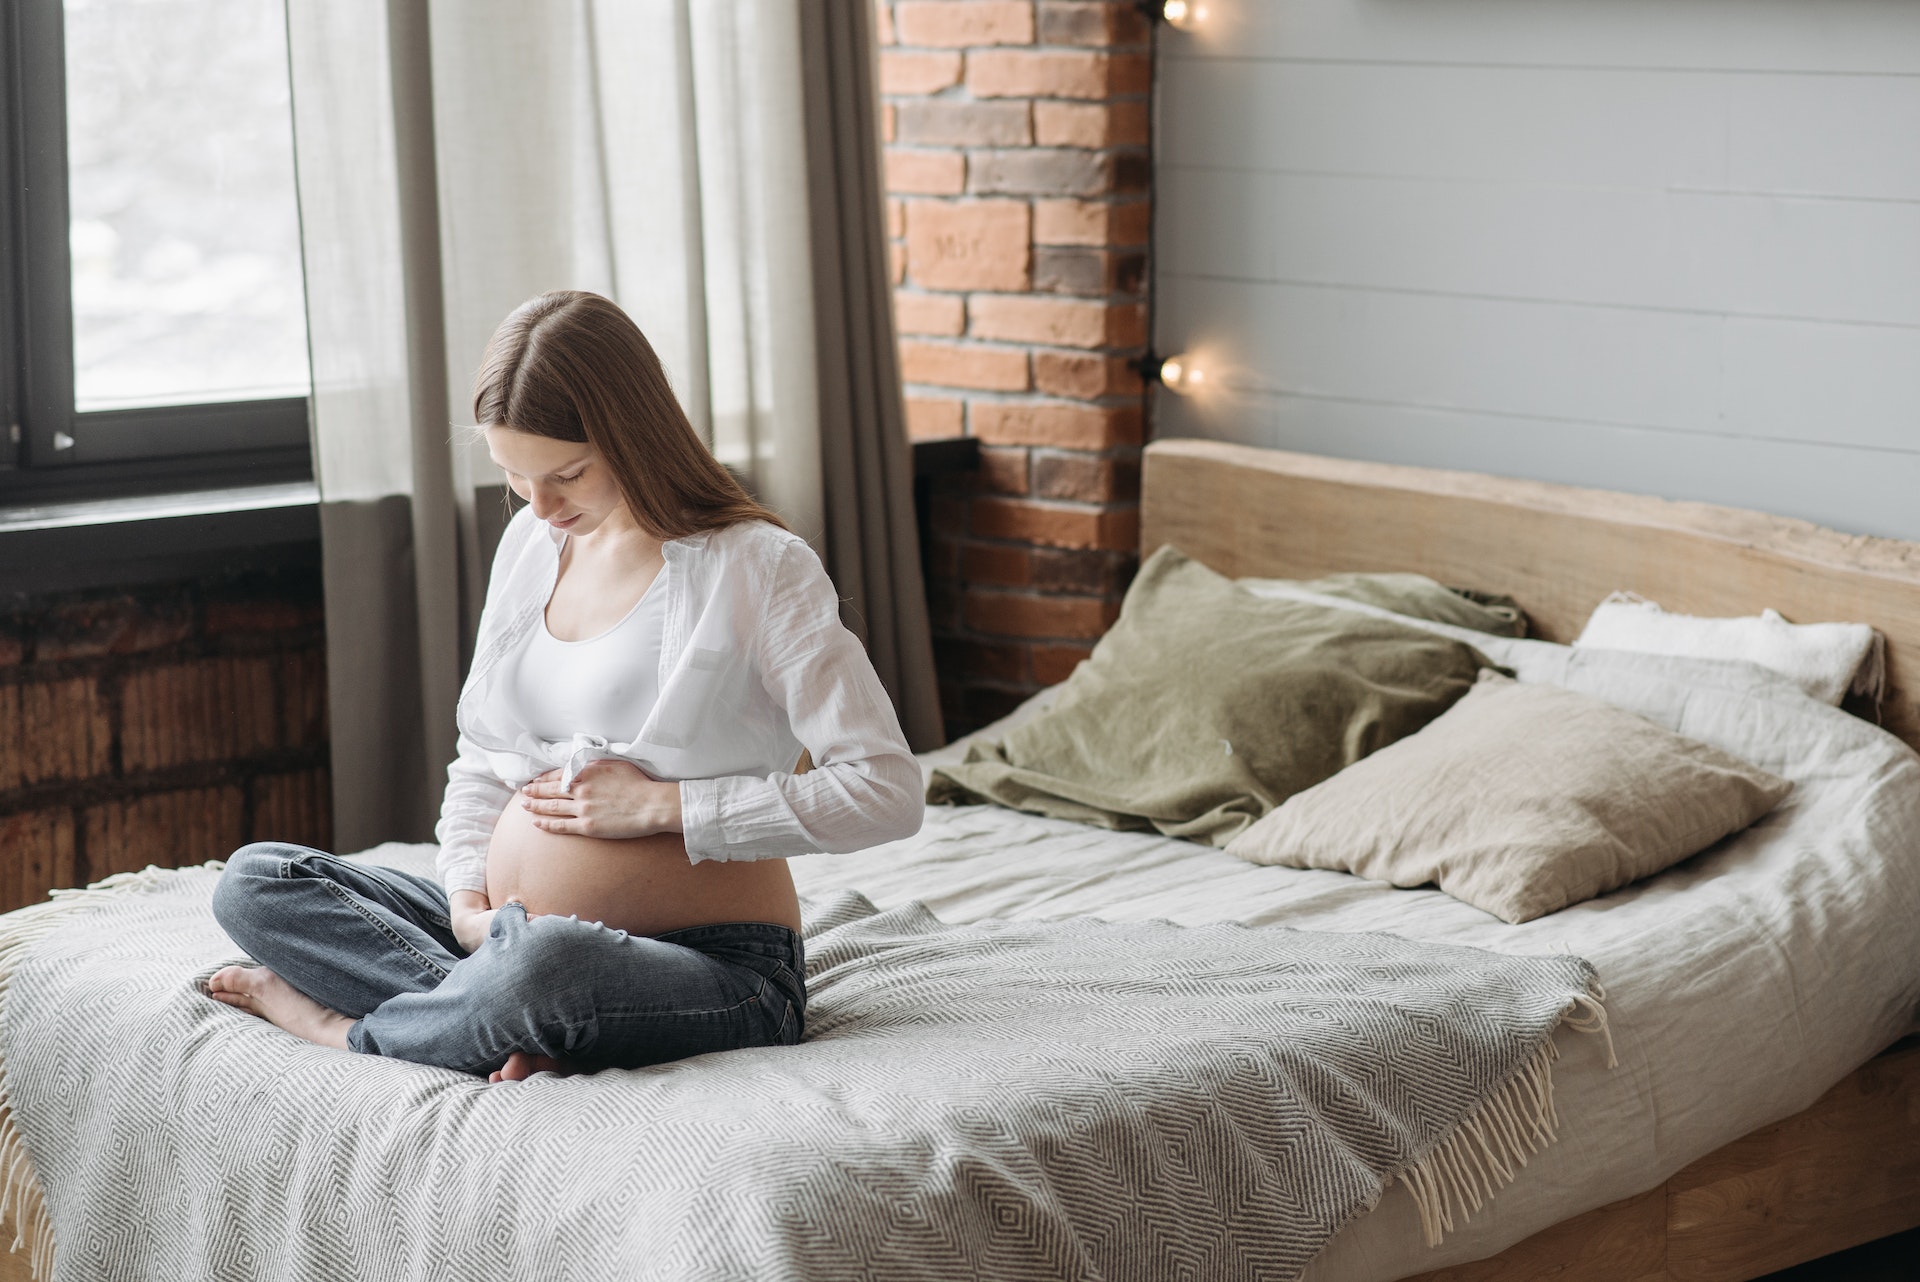 Best Pregnancy Psychic Reading Sites - Connect With Your Unborn Child